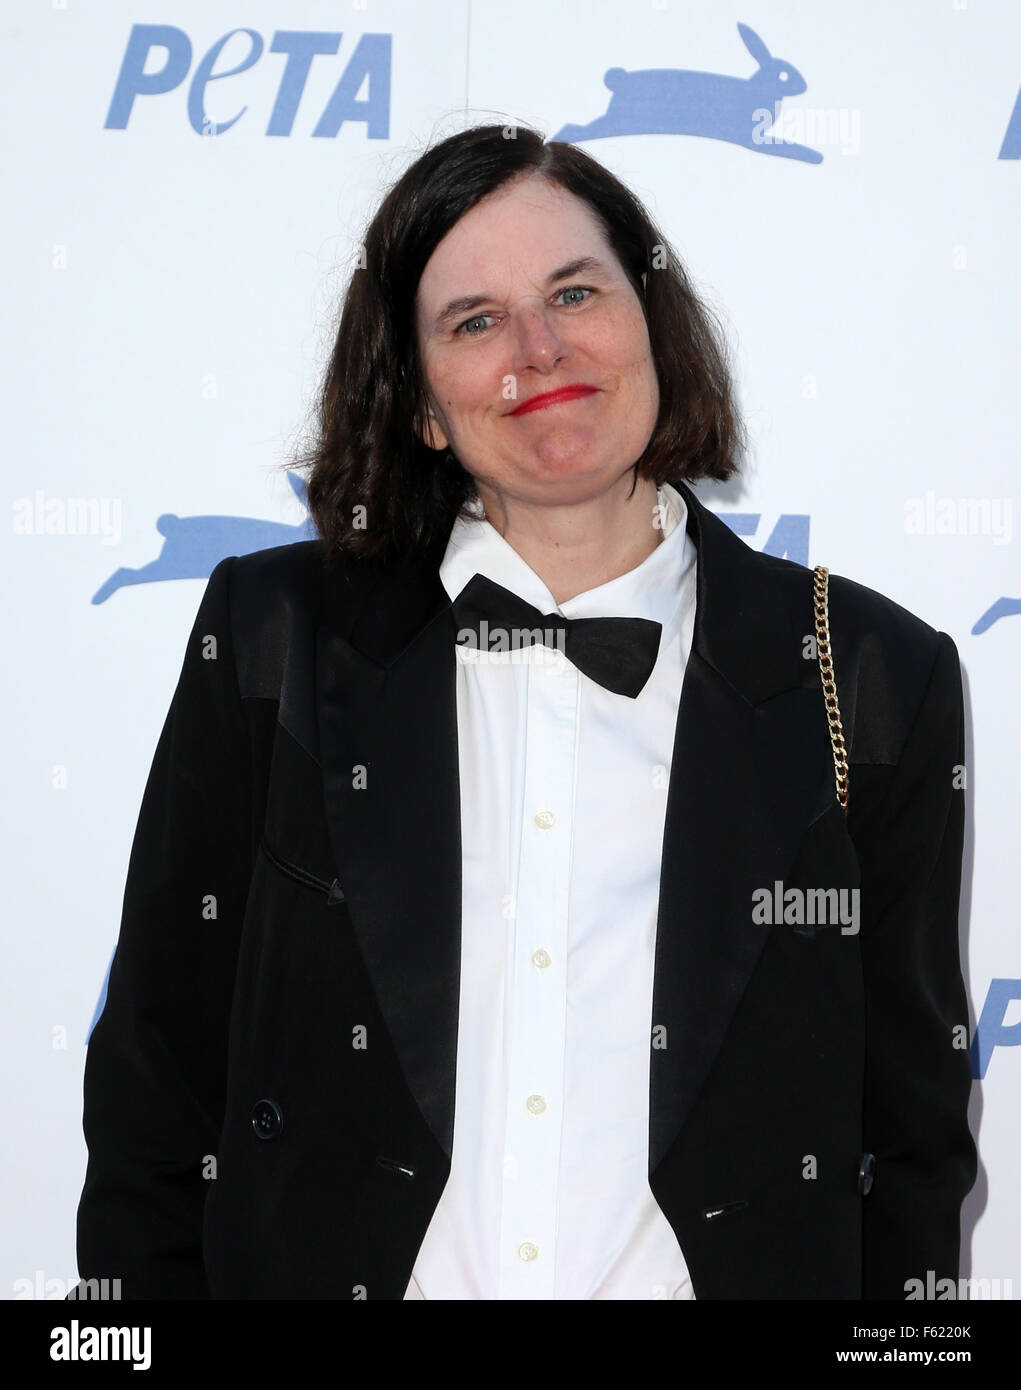 PETA’s 35th Anniversary Bash held at the Hollywood Palladium - Arrivals  Featuring: Paula Poundstone Where: Hollywood, California, United States When: 30 Sep 2015 Stock Photo